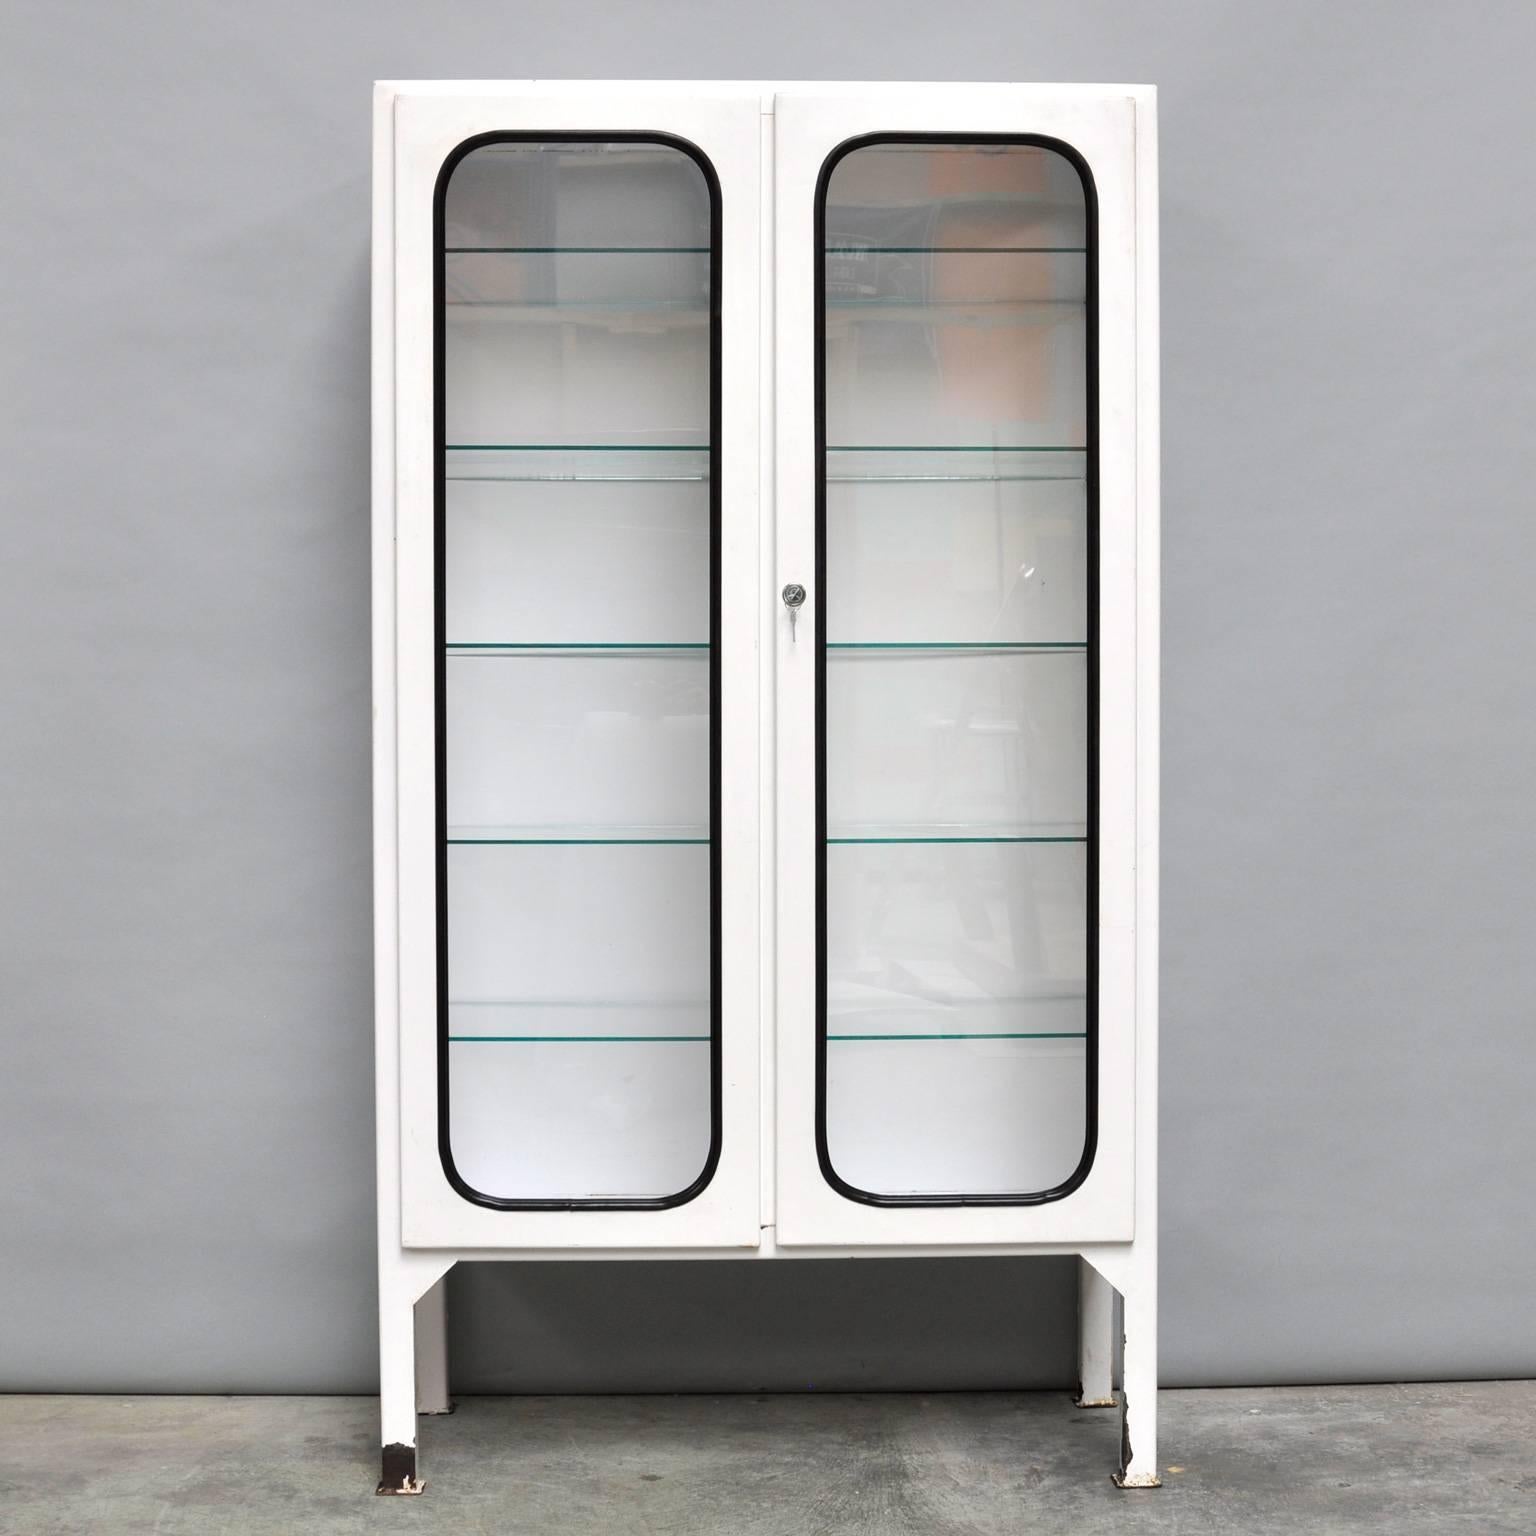 This medicine cabinet was designed in the 1960s and produced in the 1970s in Hungary. It is made of steel and glass. The glass is held by a black rubber strip. The cabinet comes with five adjustable glass shelves and a functioning lock. It is in